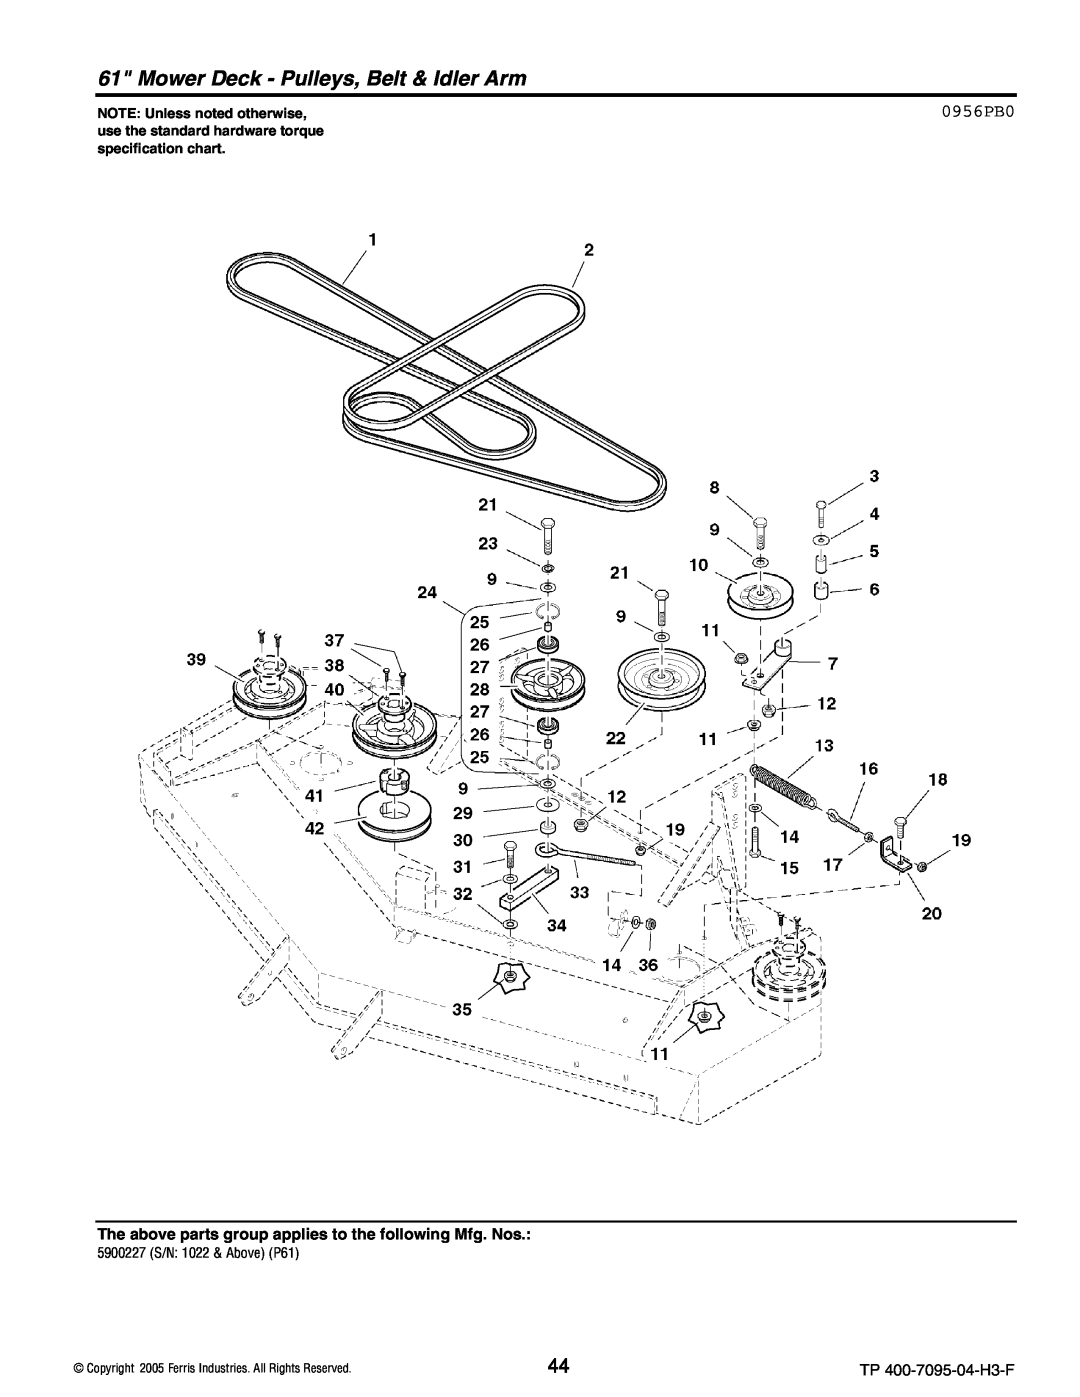 Ferris Industries 5901036, 5901035, 5900228 Mower Deck - Pulleys, Belt & Idler Arm, 0956PB0, NOTE Unless noted otherwise 